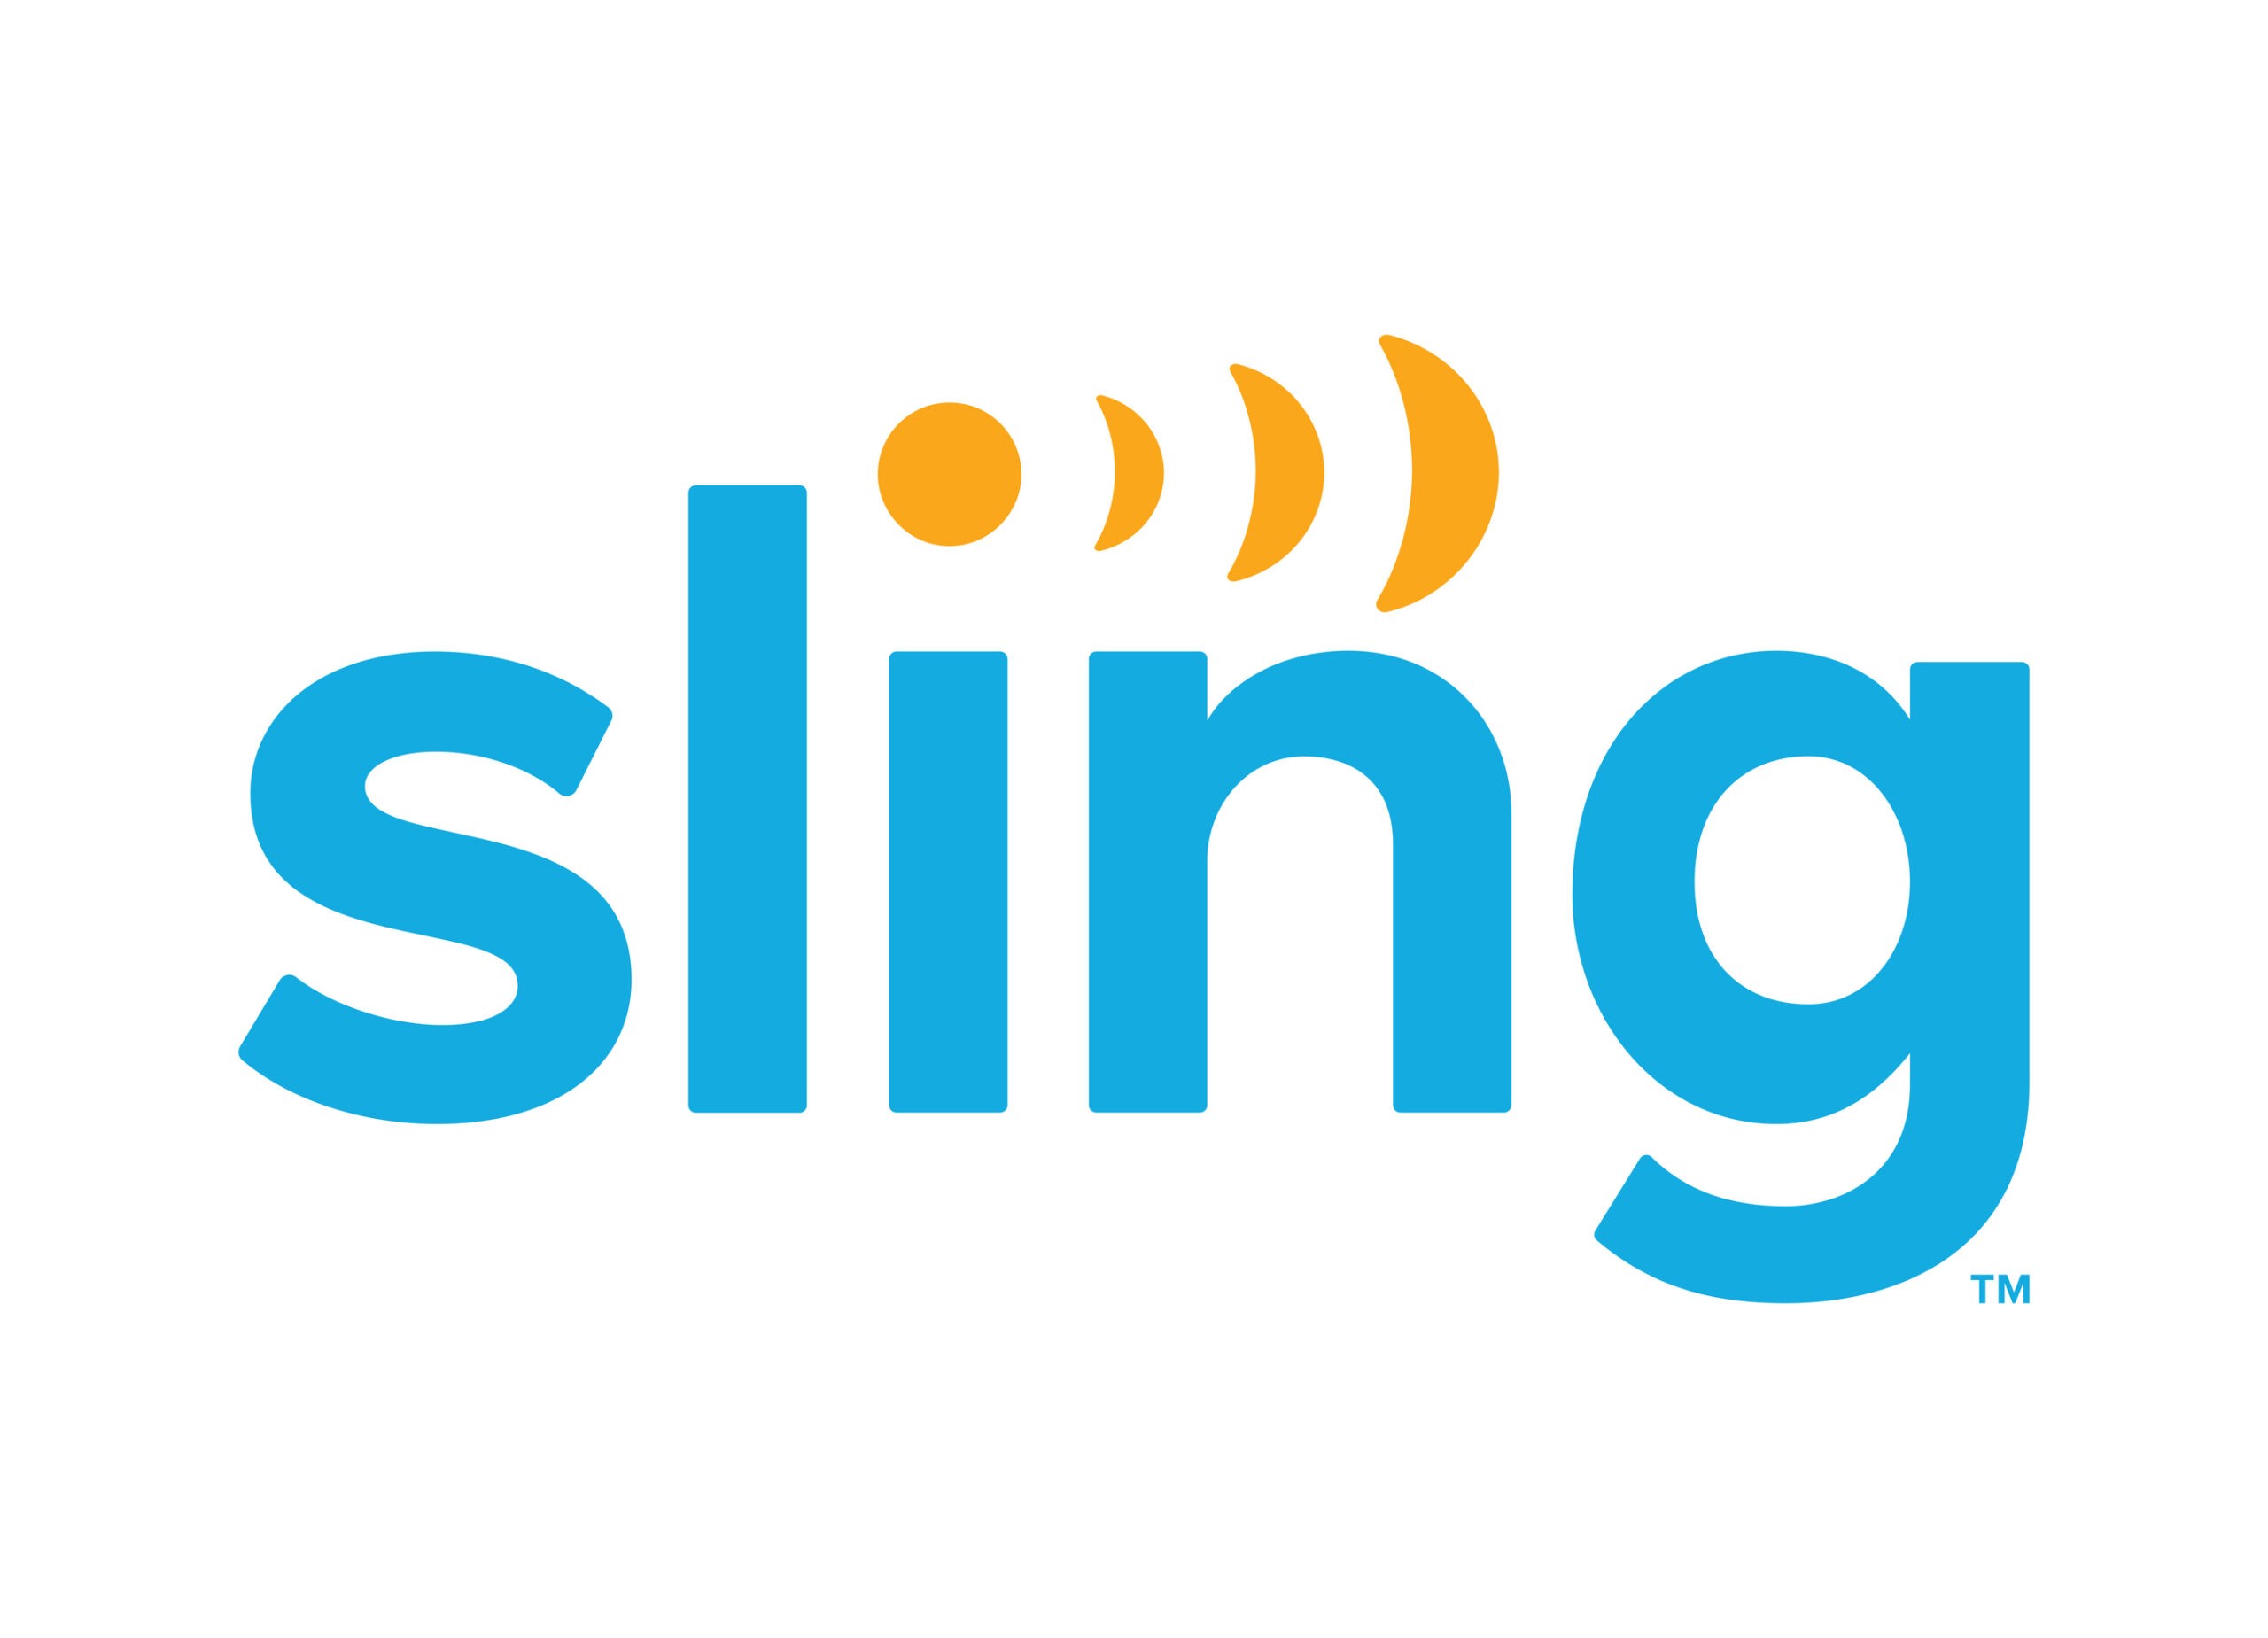 SLING offers free 'Happy Hour' primetime TV • Home Theater Forum Home